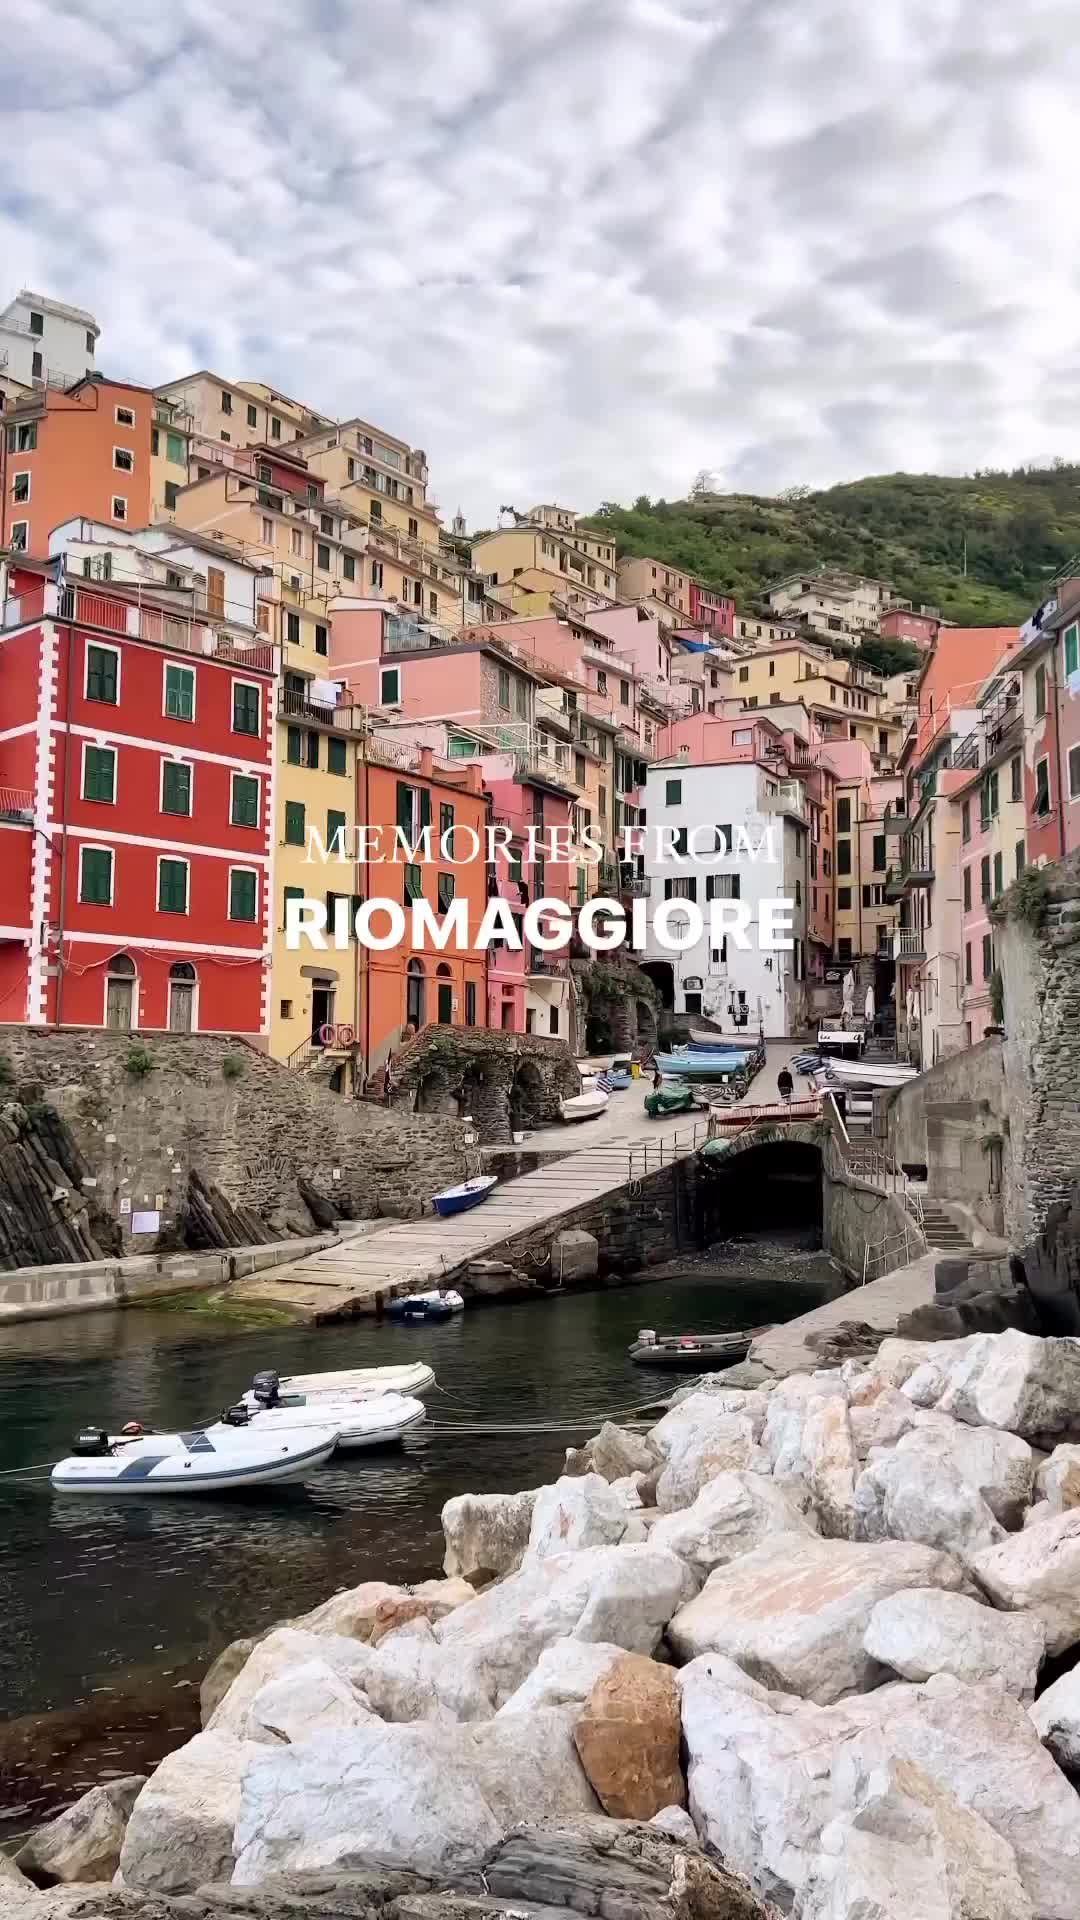 5 Reasons to Visit Riomaggiore This Summer